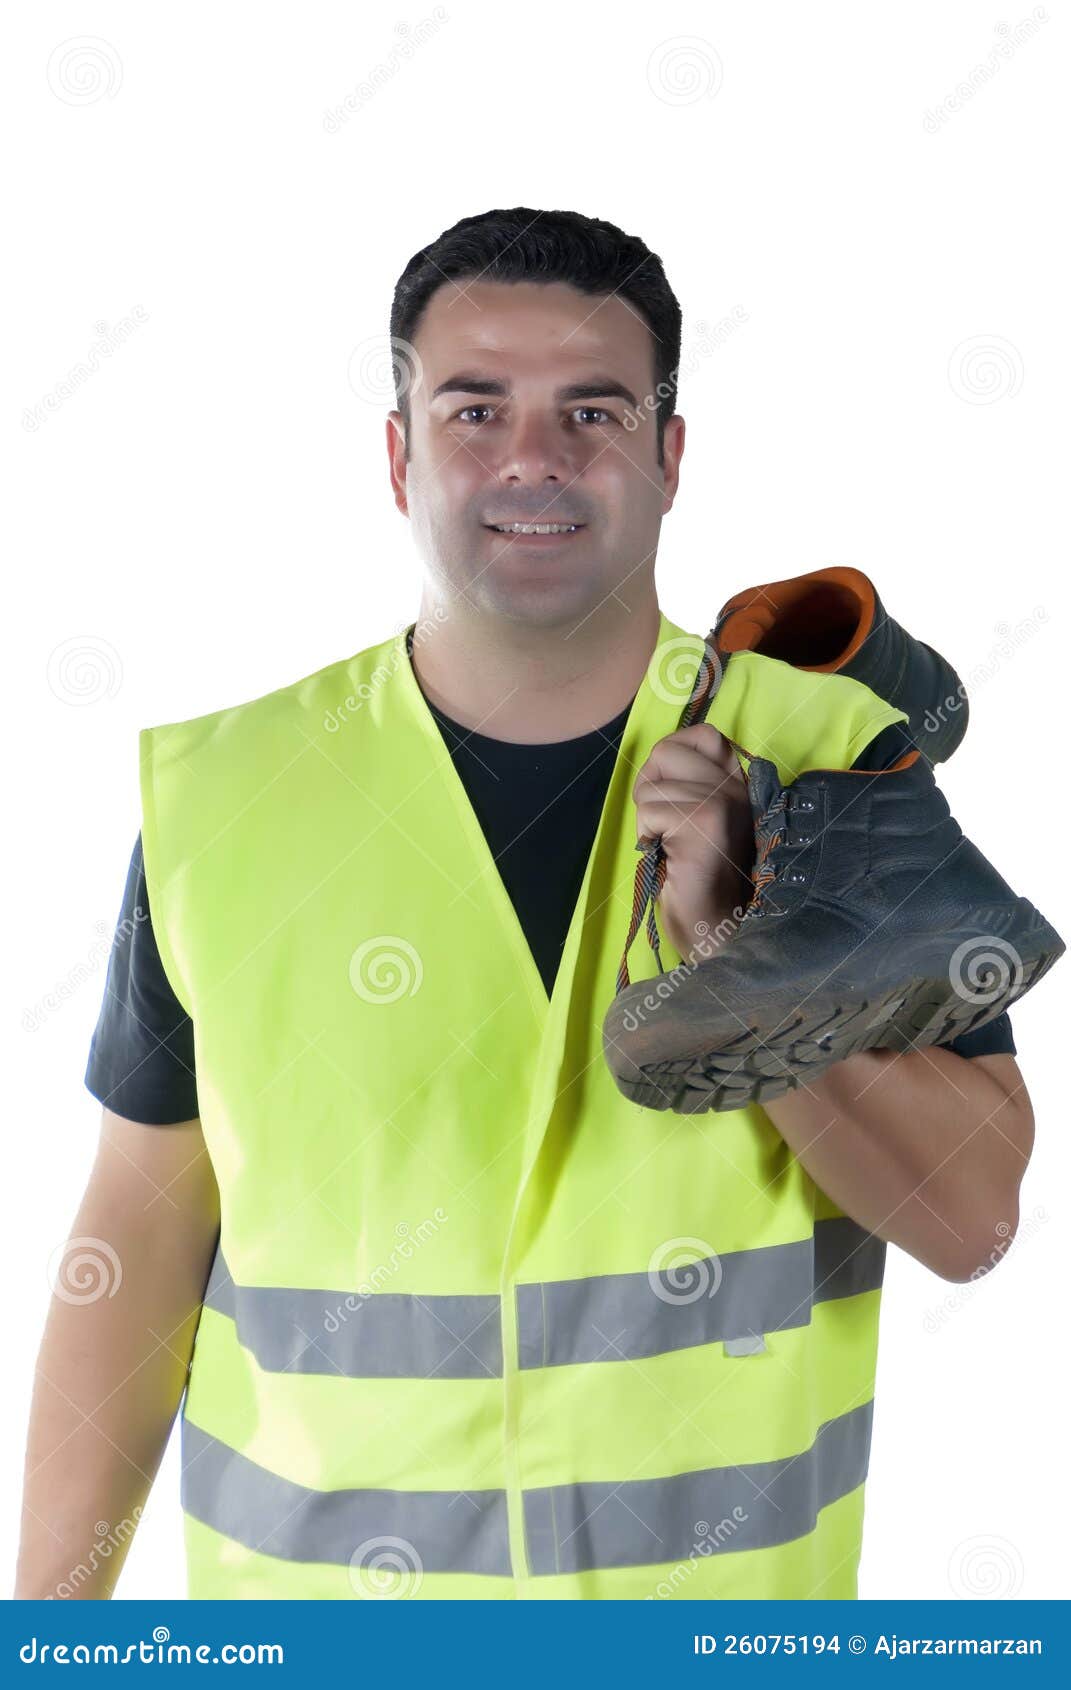 Attractive Man In Work Clothes And Shoes Stock Images - Image: 26075194